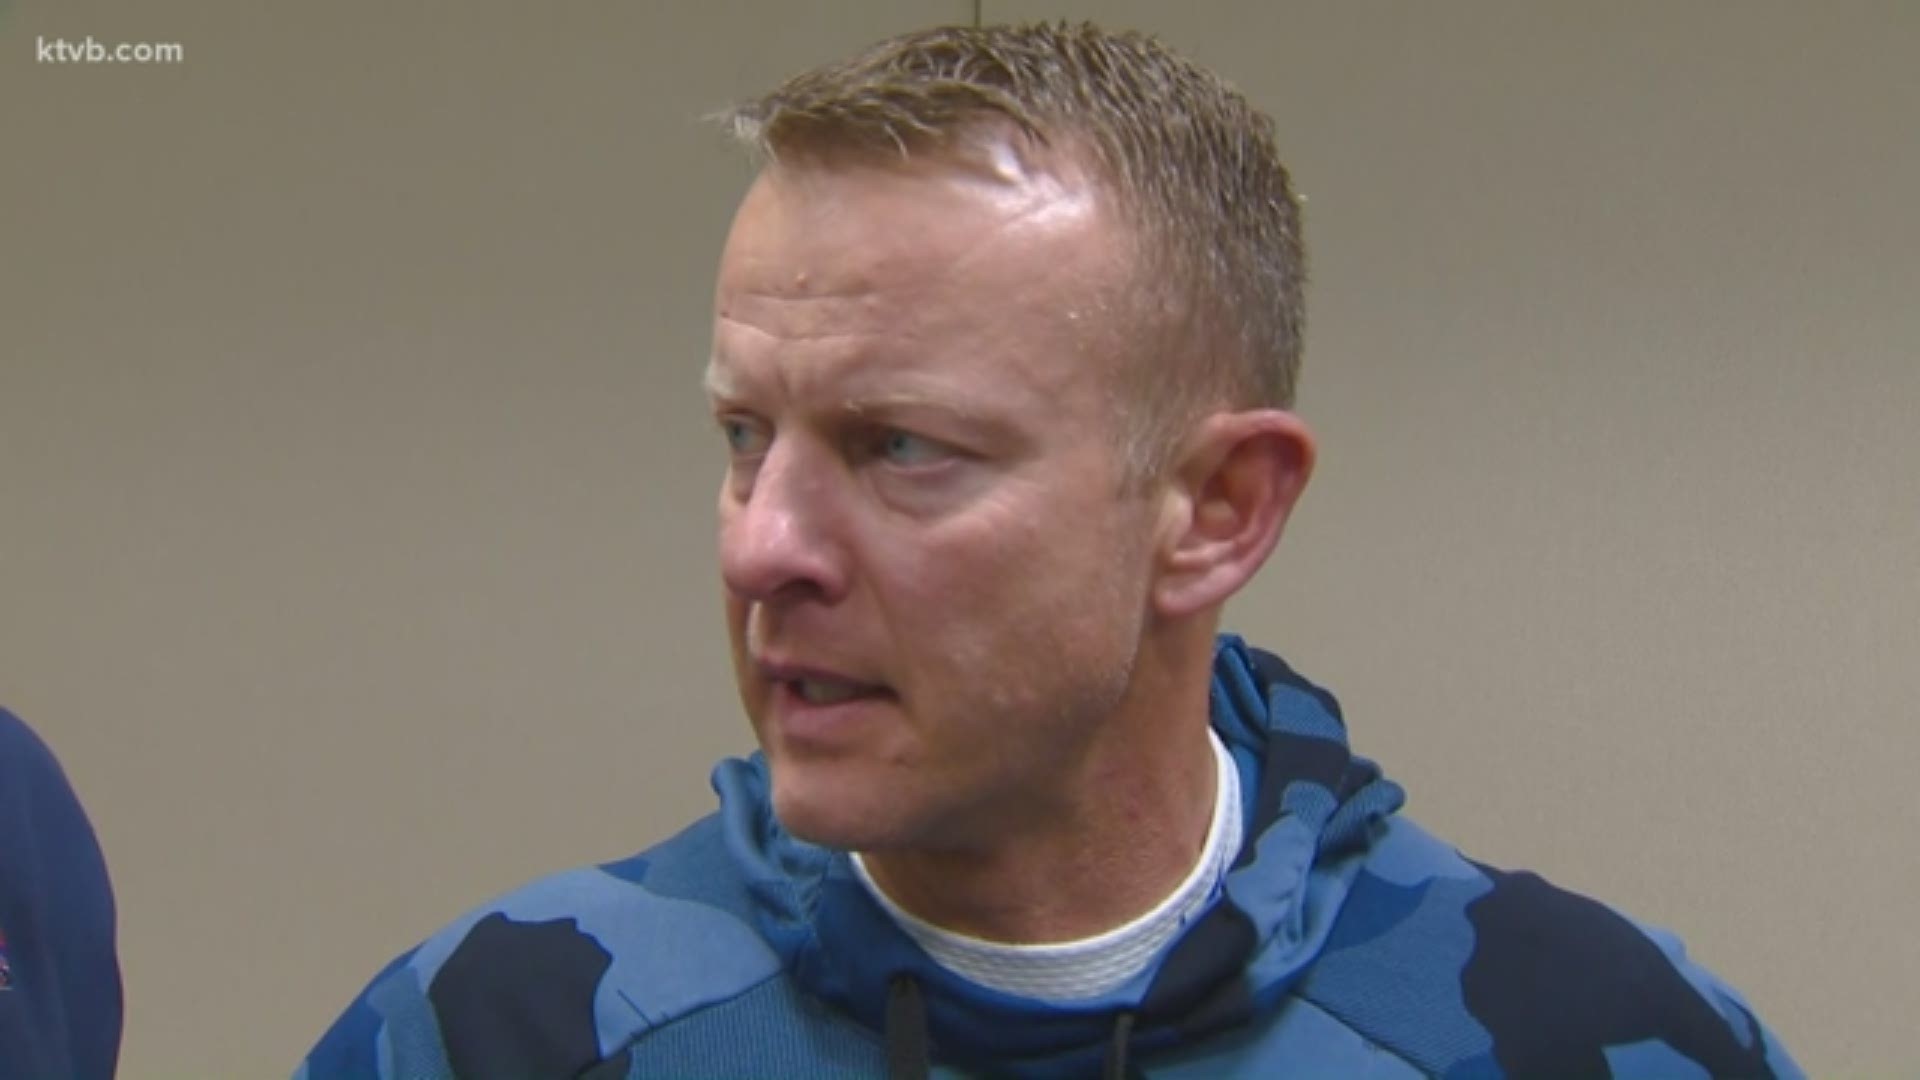 The Broncos are now undefeated in Mountain West Conference play for the first time in program and Harsin explains what it means for the team.